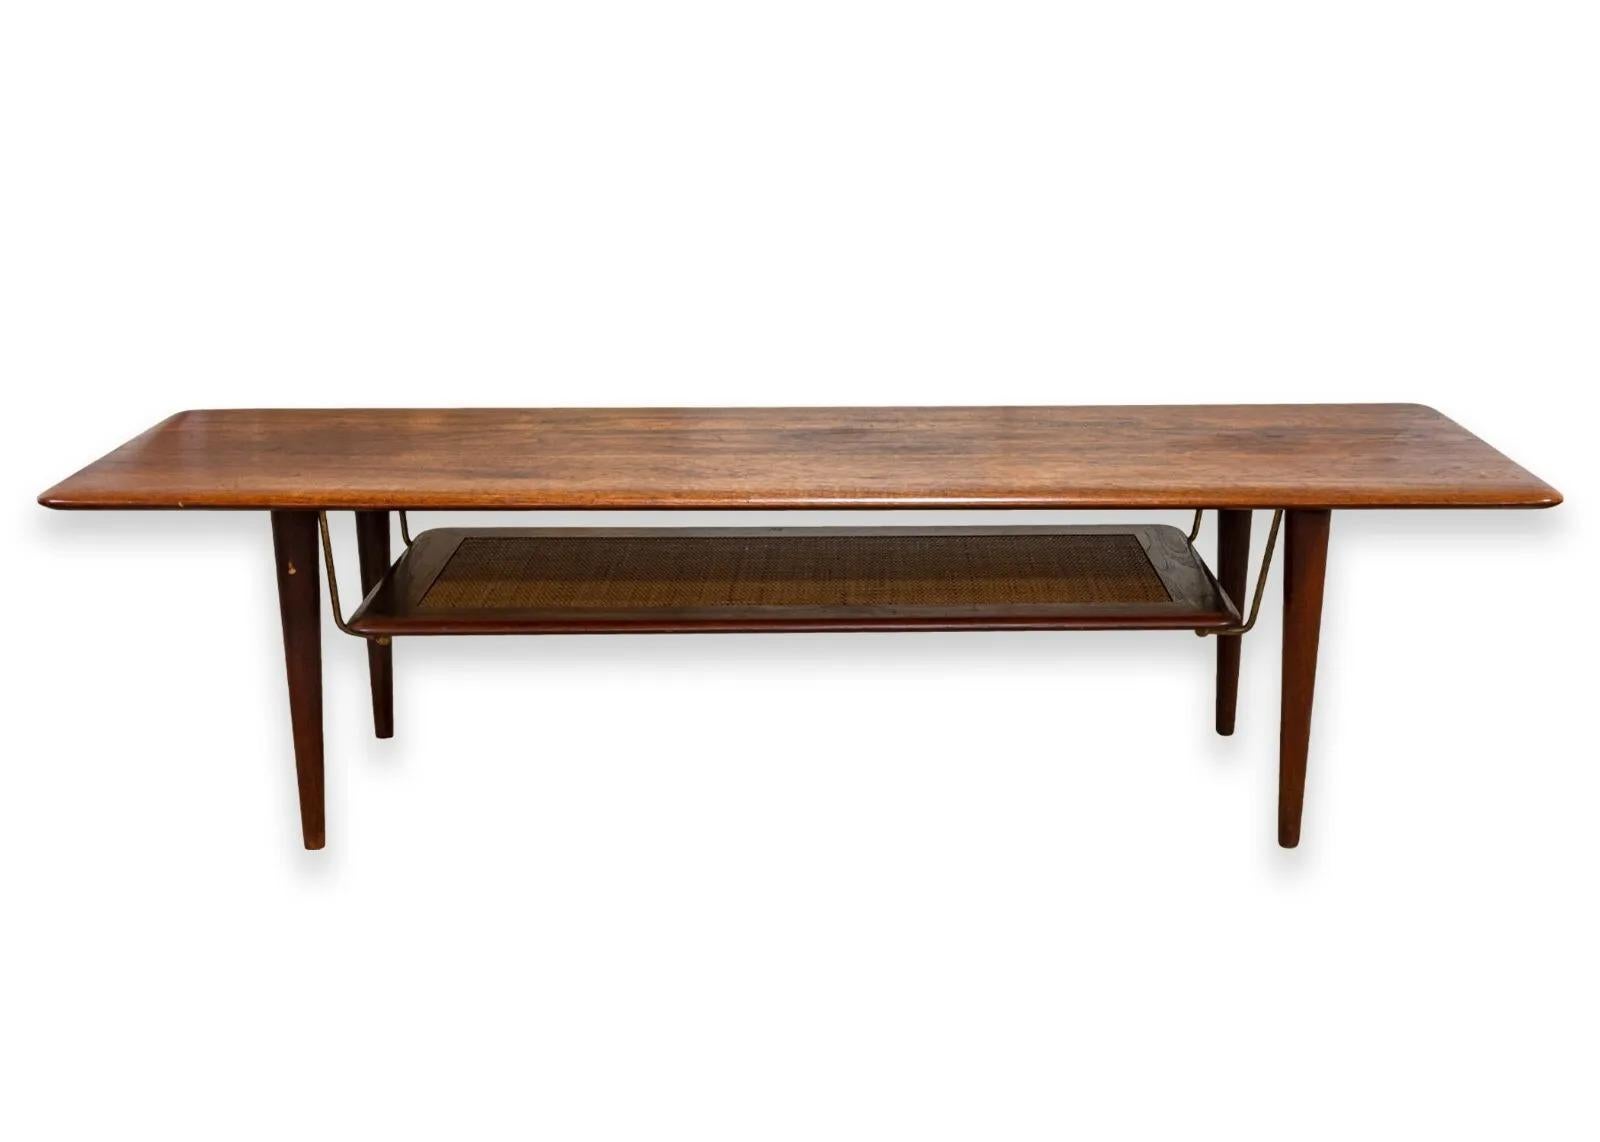 A Peter Hvidt for John Stuart teak coffee table. A stunning mid century modern coffee table constructed from a beautiful teak wood and accented with a cane weaving. This table features a two tier design. The lower tier hangs down via brass